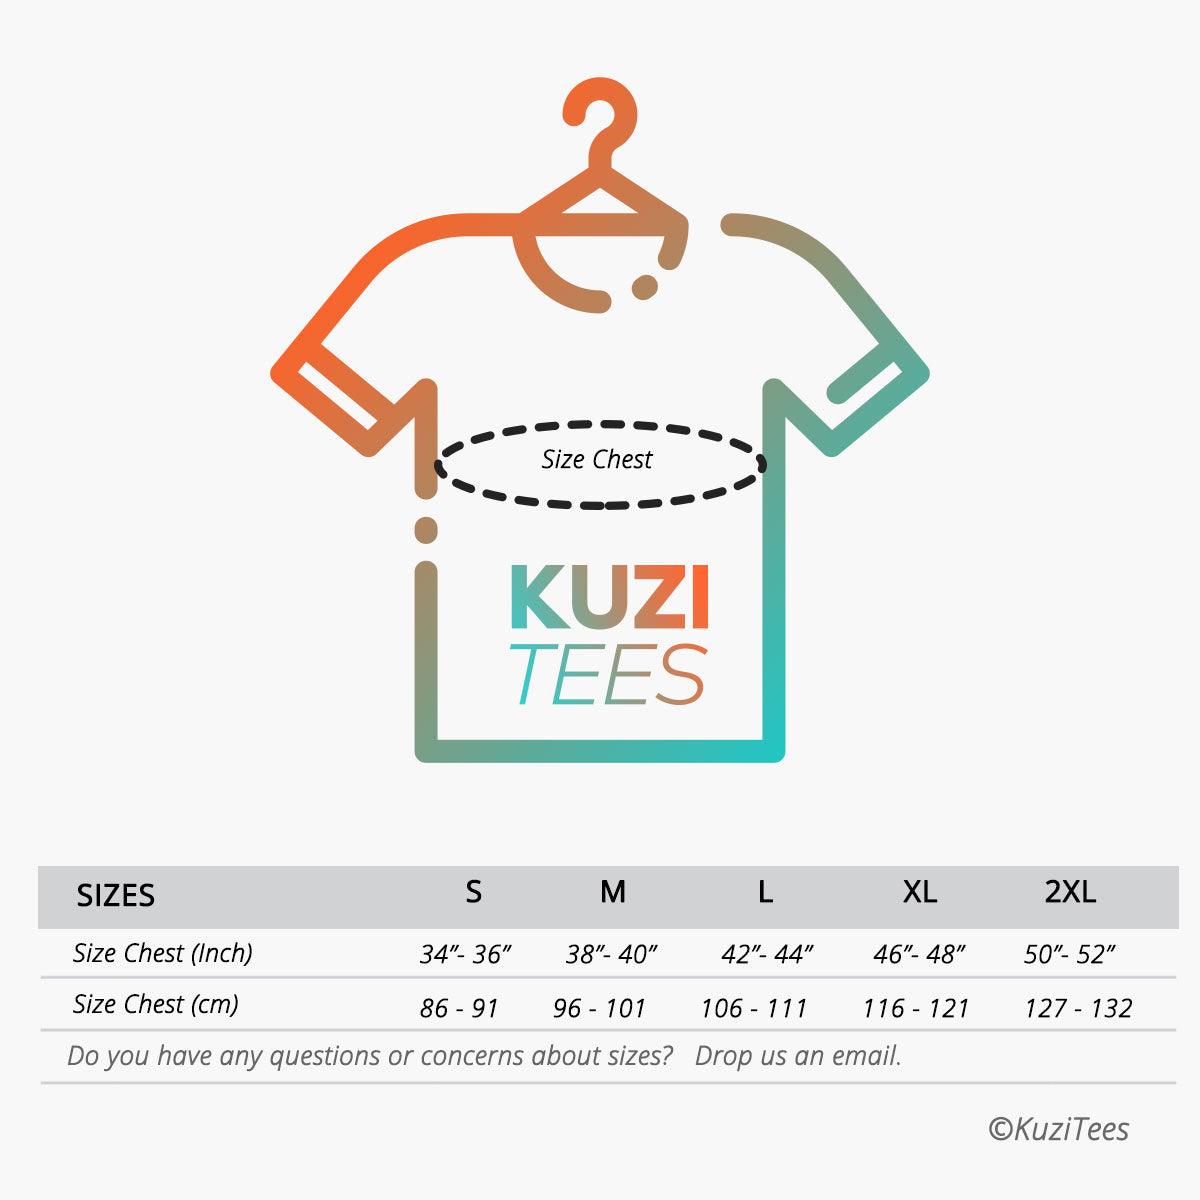 Come to the dark side of the Funny Geek Star Wars T-Shirt - Kuzi Tees